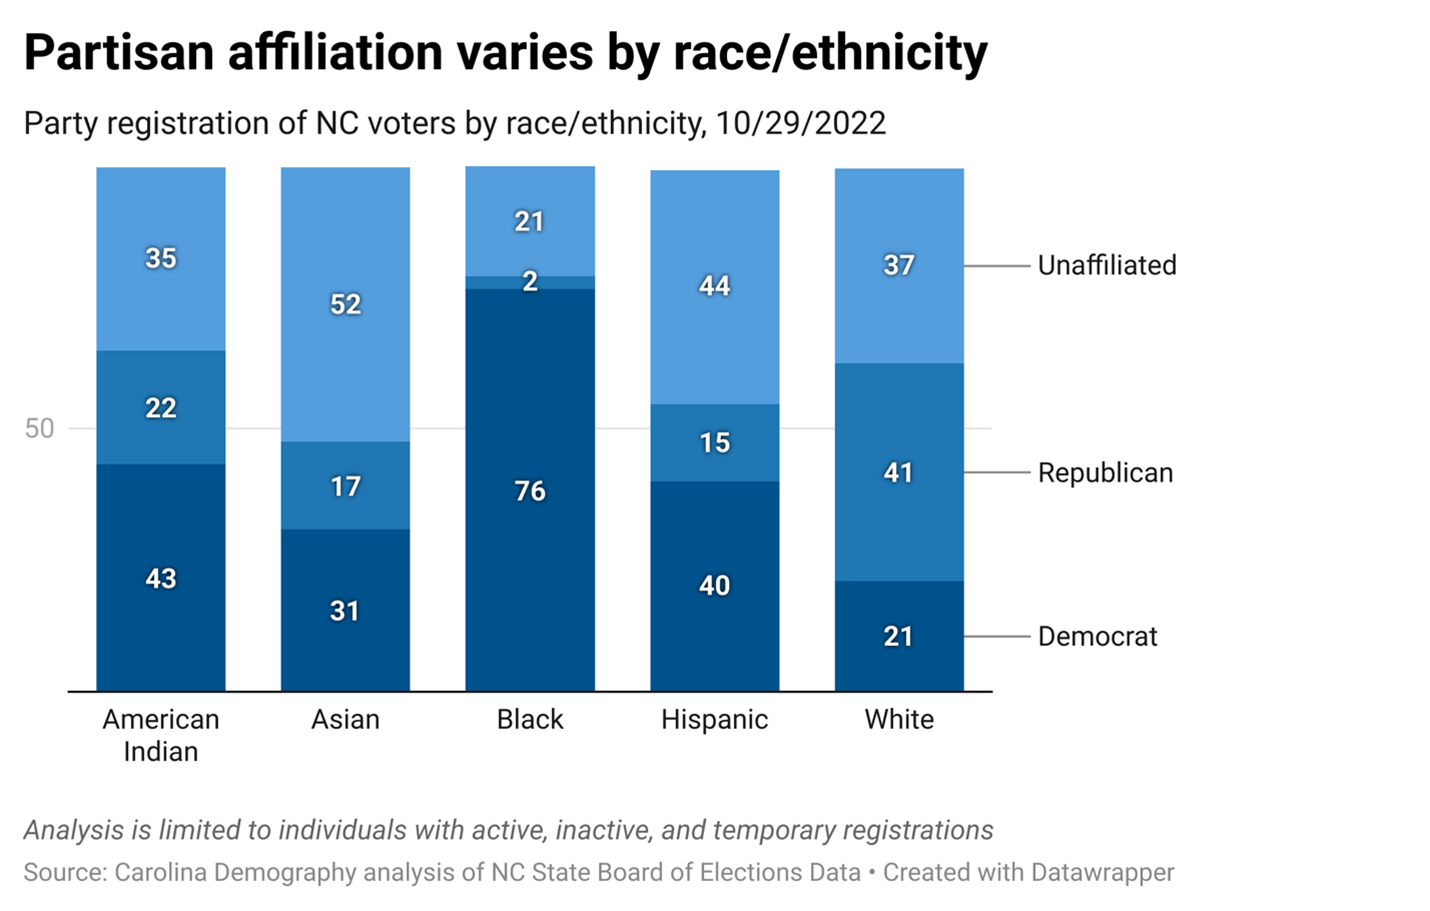 Black (76%) and American Indian (43%) voters are most likely to be registered Democrat while white (21%) voters are least likely to be registered Democrat. 